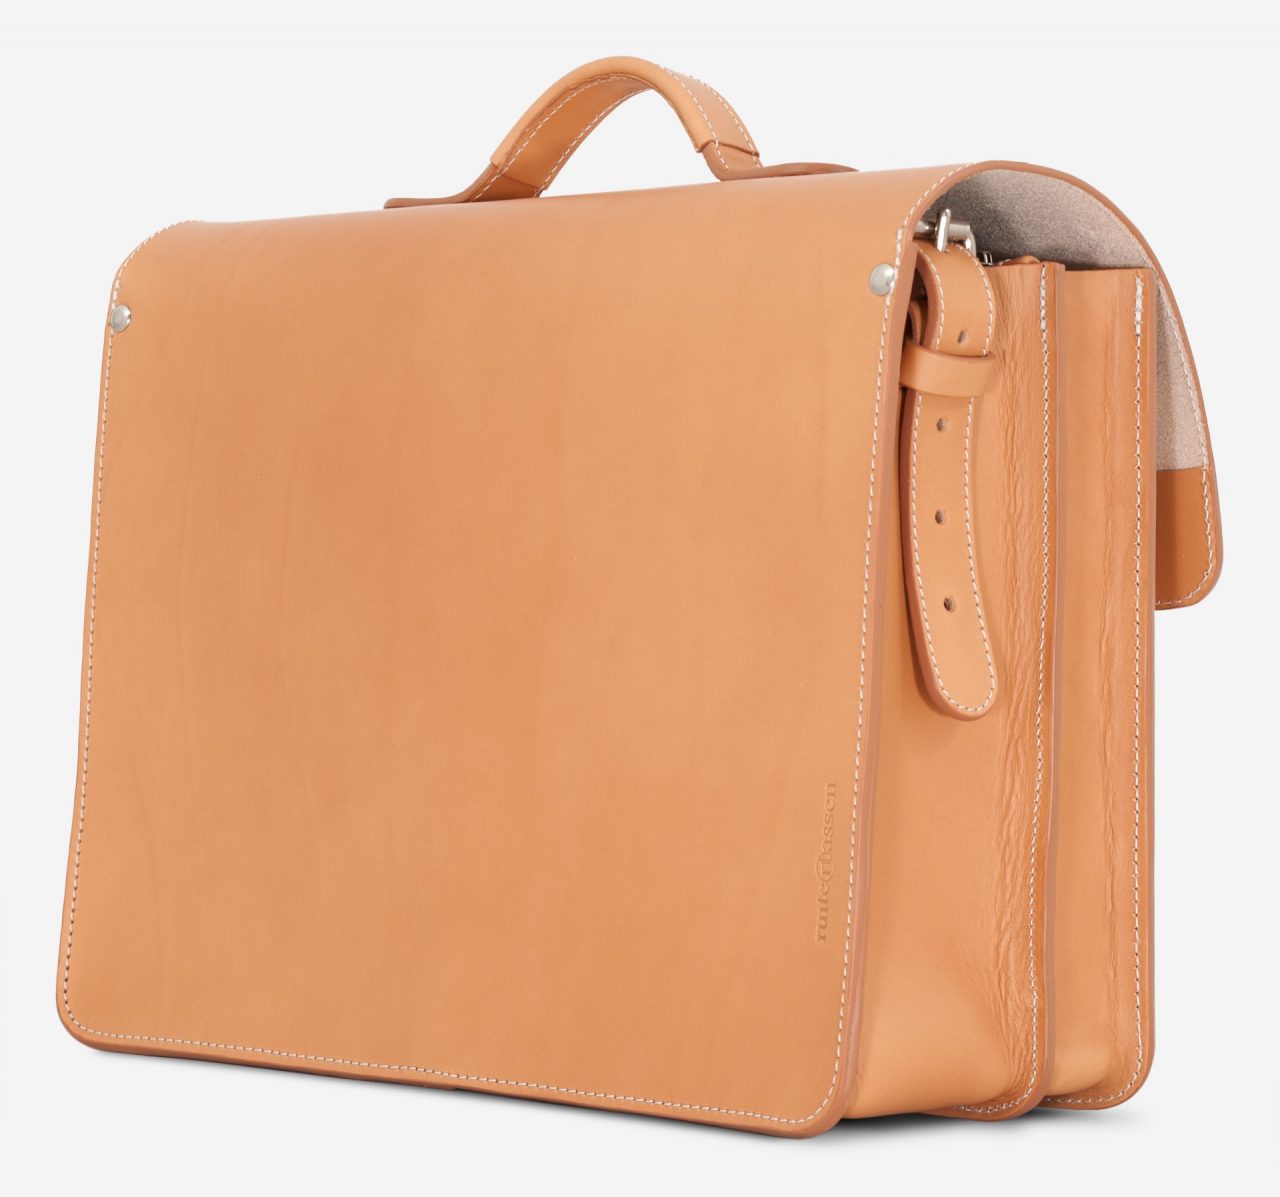 Back view of the tan leather satchel briefcase with Ruitertassen logo.